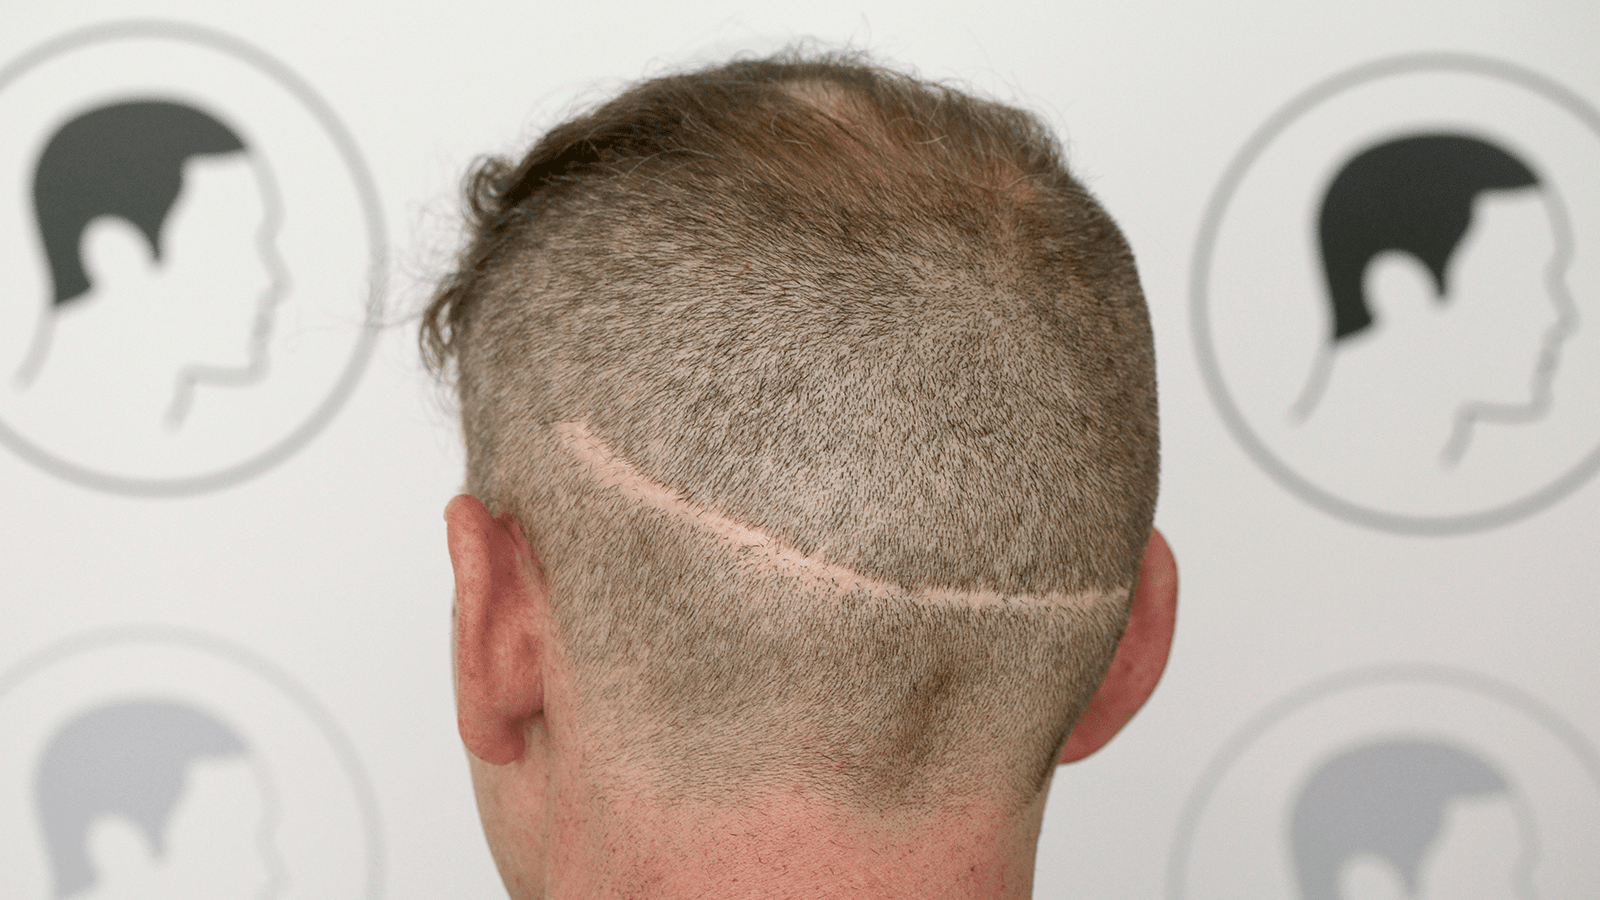 Scar camouflage with Scalp micropigmentation